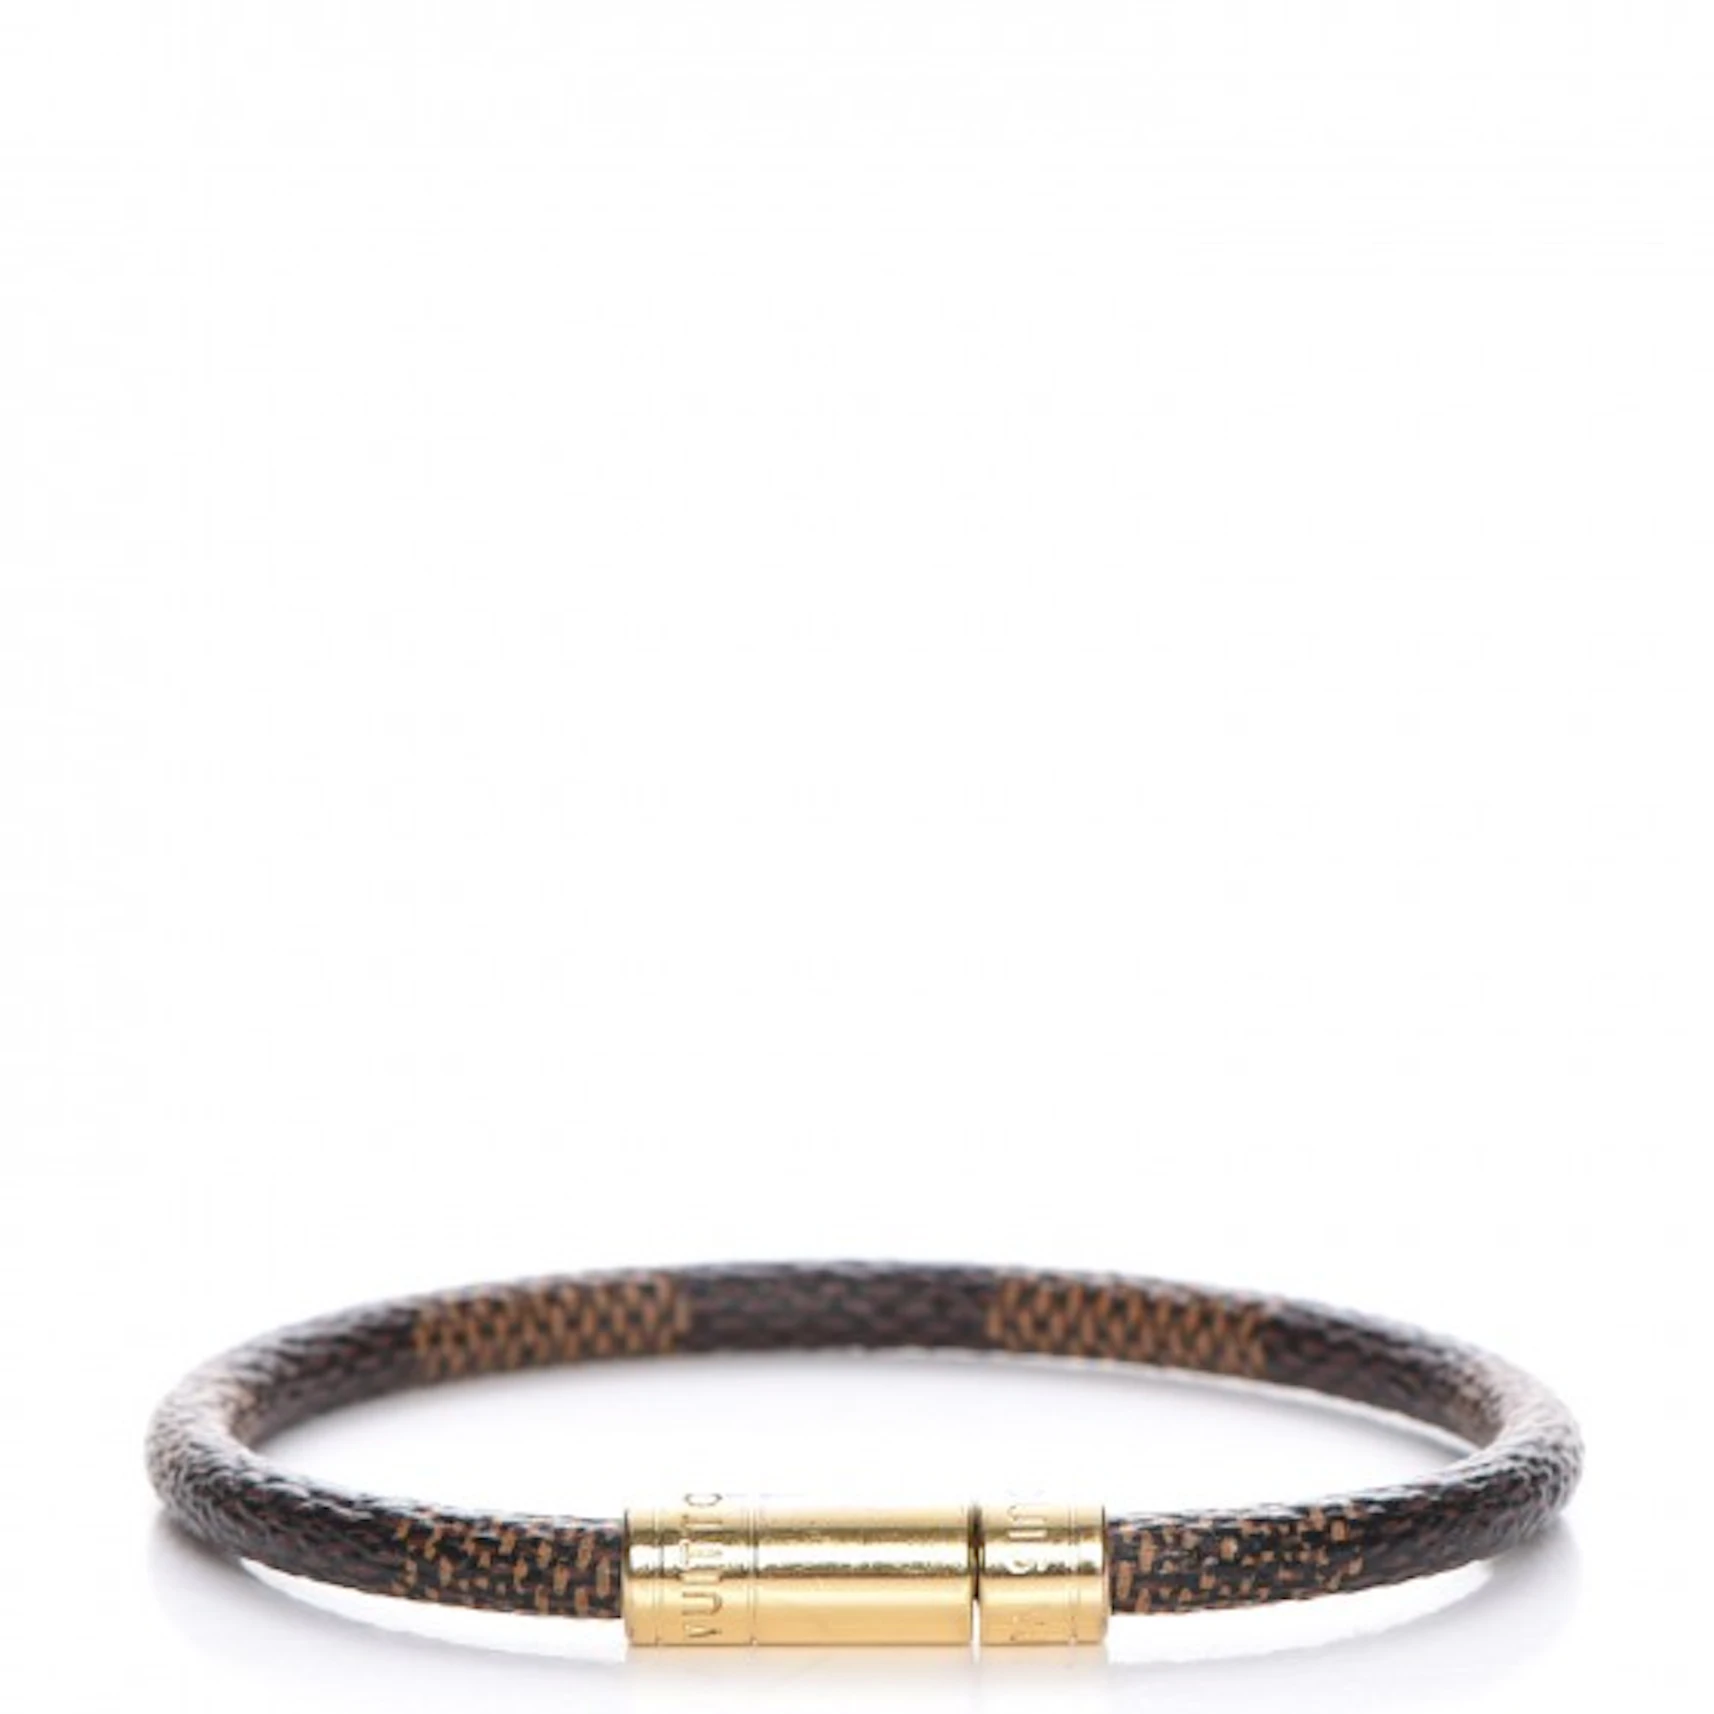 Louis Vuitton Keep It Bracelet with Studs  Rent Louis Vuitton jewelry for  $55/month